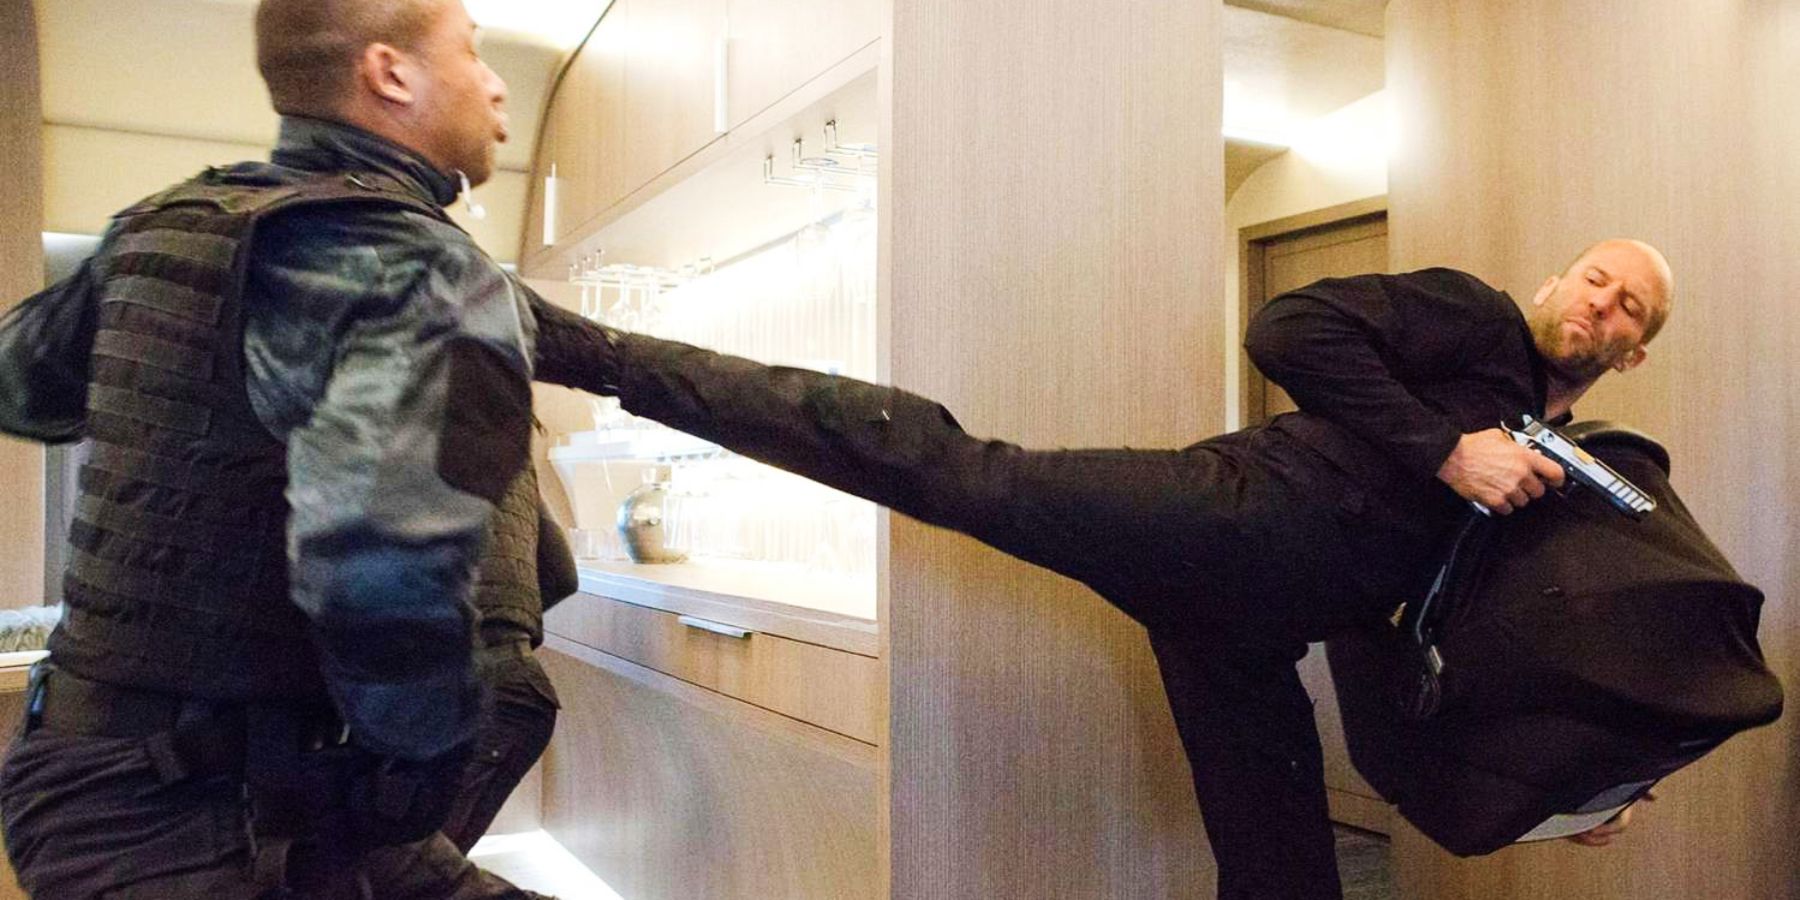 Jason Statham's Deckard Shaw kicking vested man in Fate of the Furious